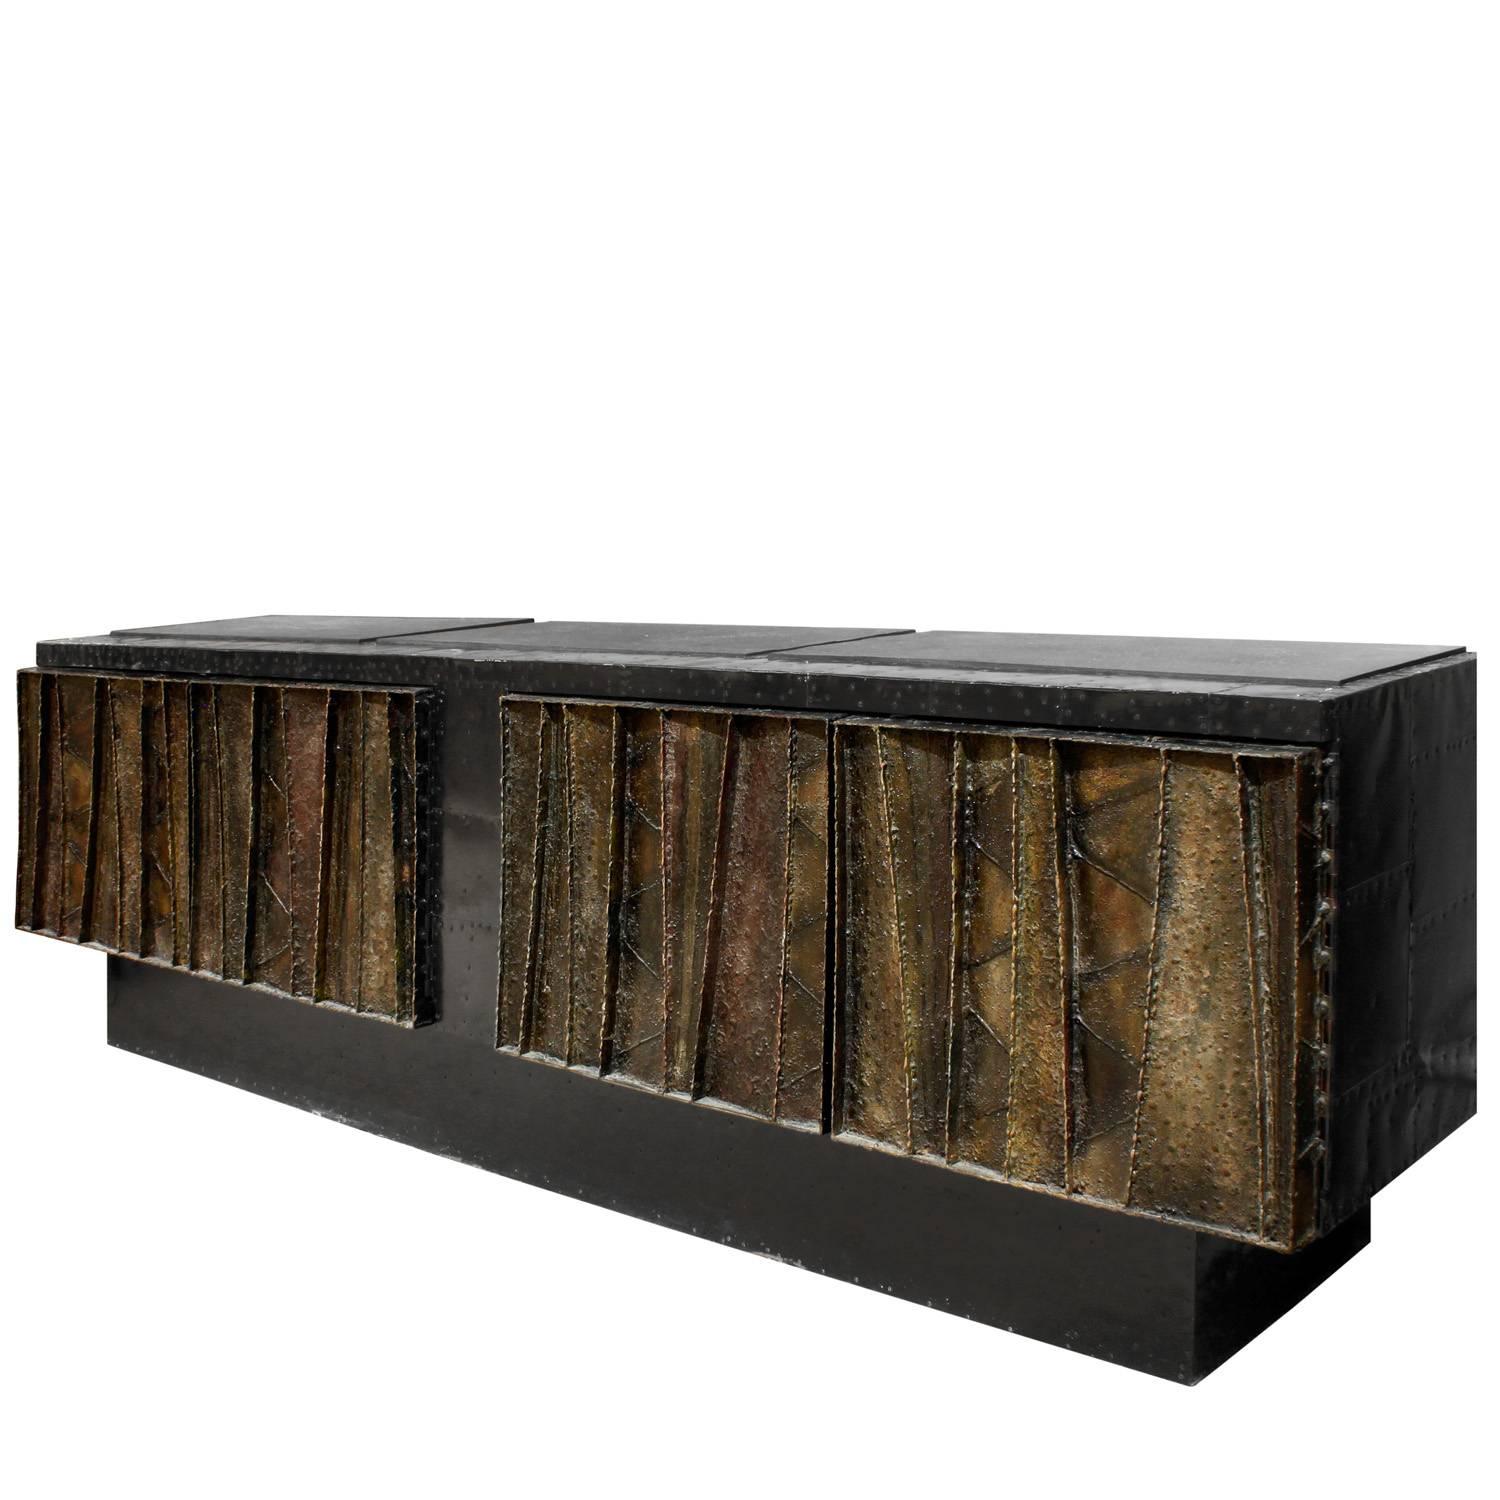 Hand-welded steel "Deep Relief Credenza" with soft luxe coloration on doors and three inset slate slab tops by Paul Evans, American 1970 (signed and dated "Paul Evans 70"). This piece is spectacular. It has rich jewel tones and